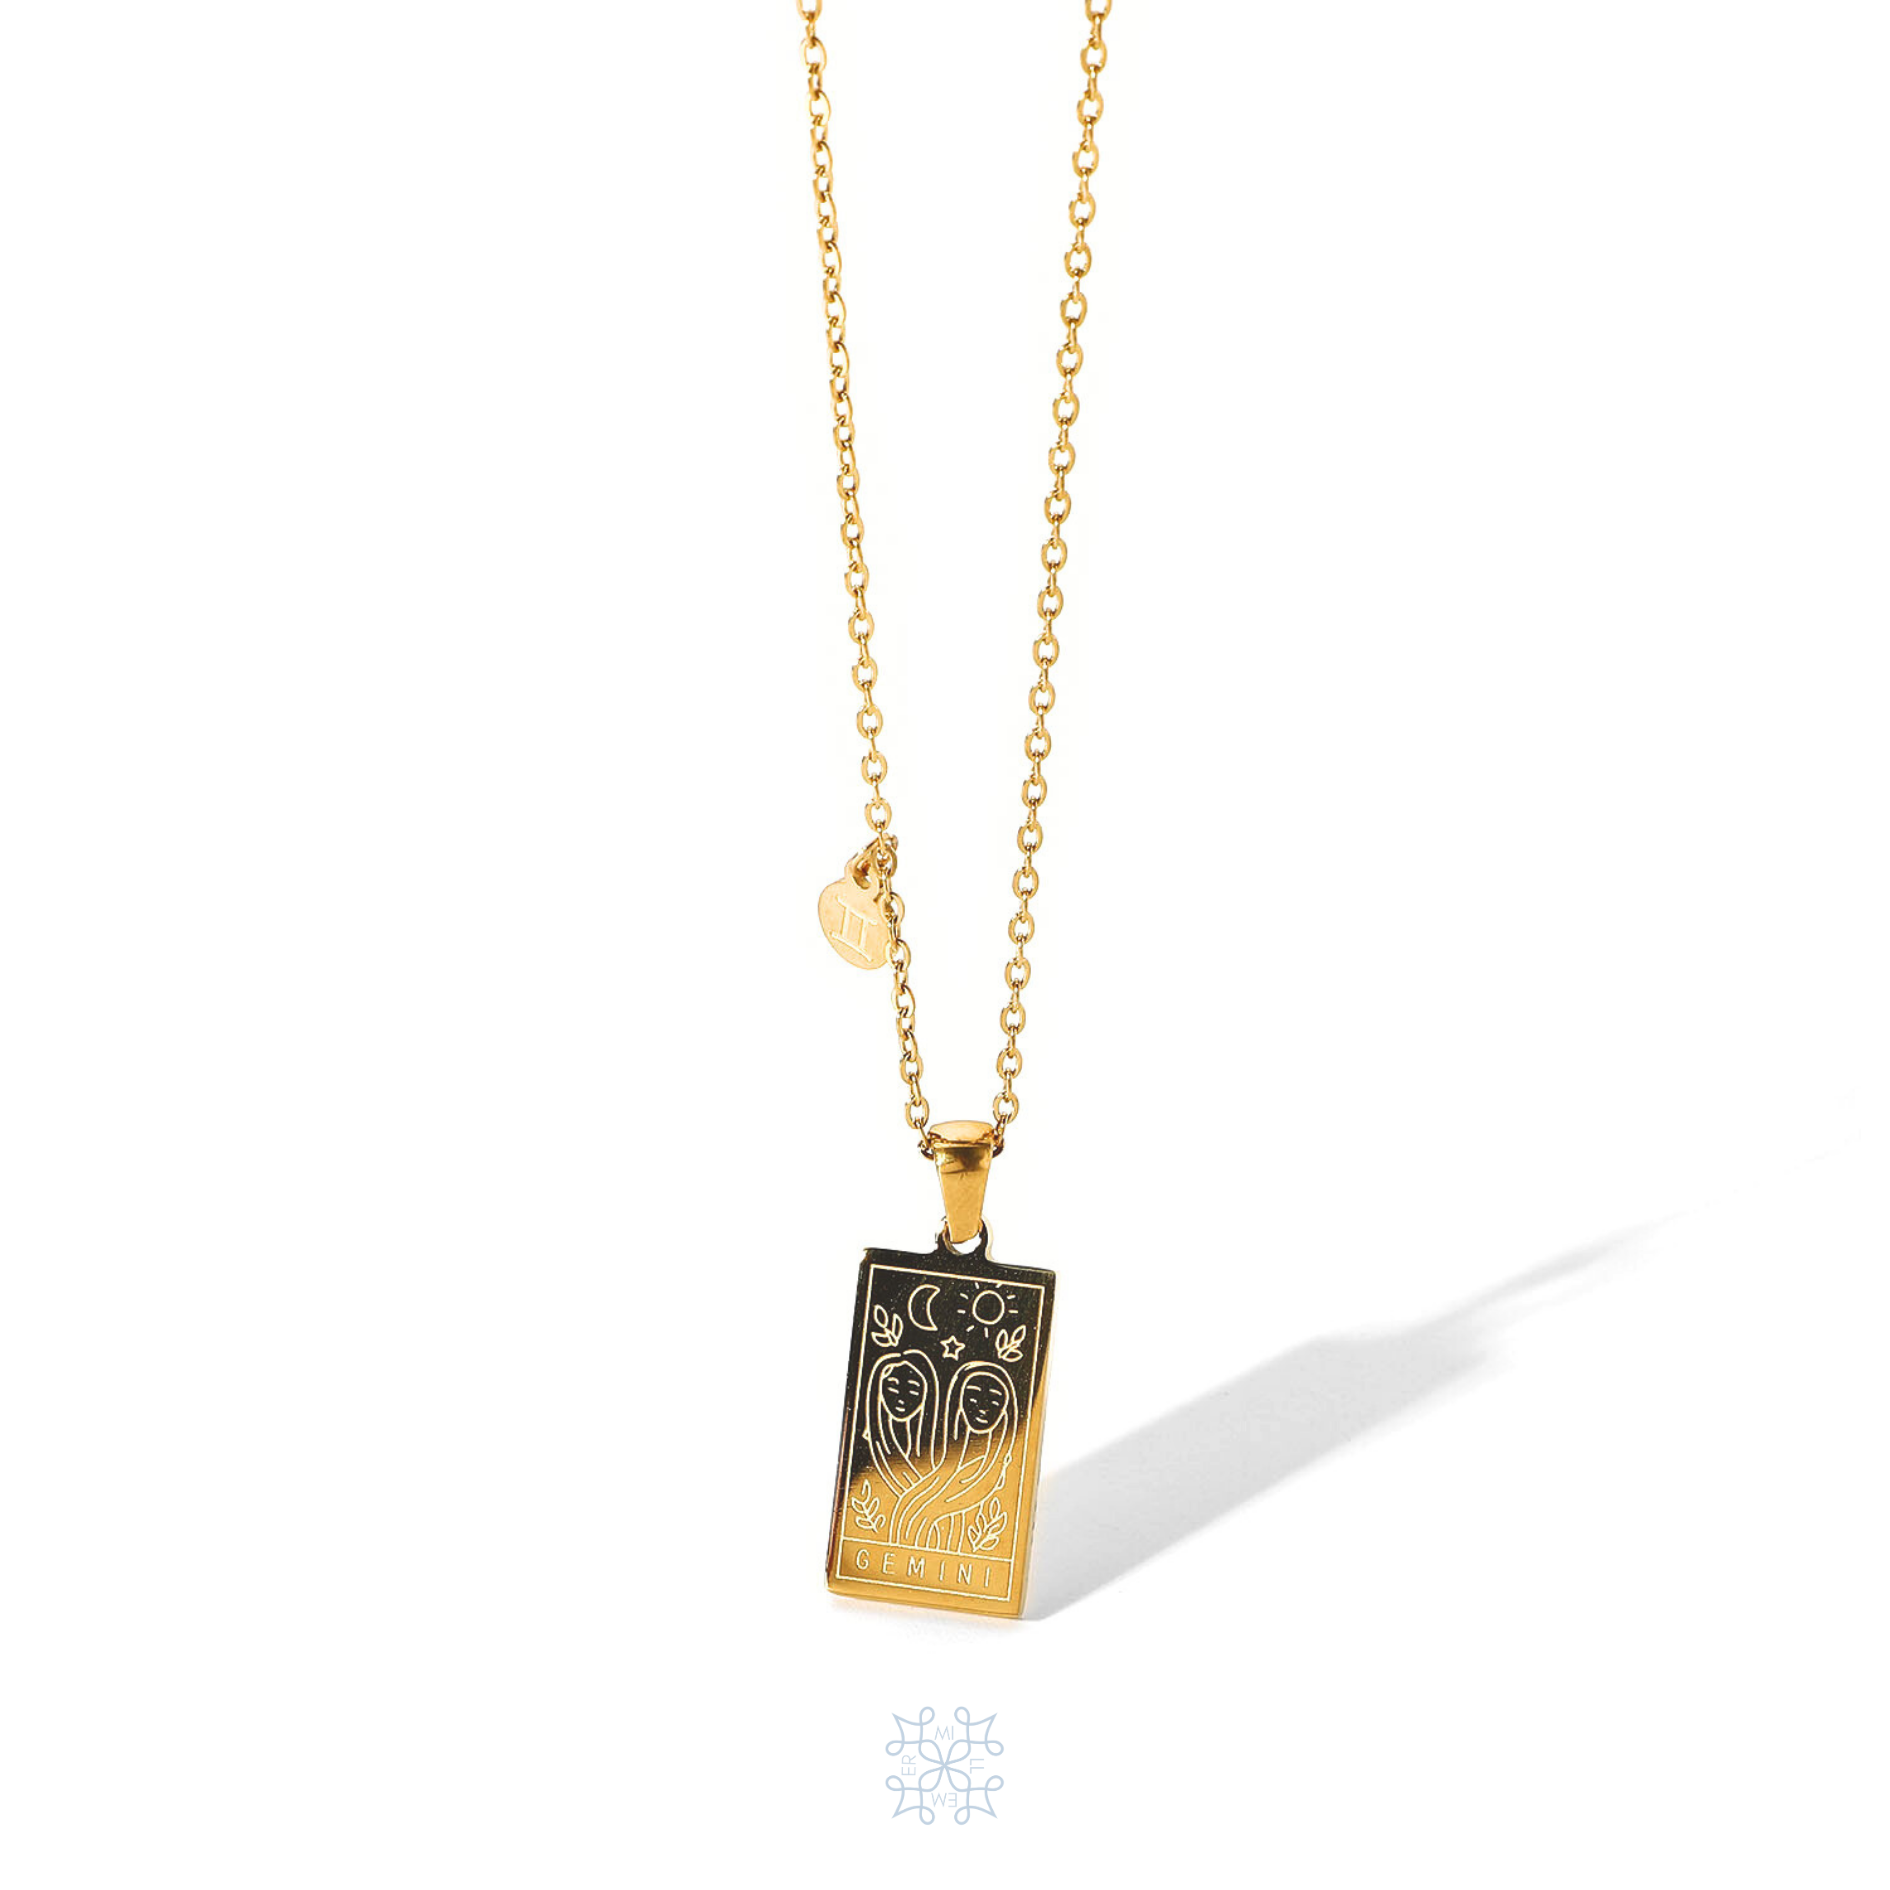 GEMINI Zodiac Pendant Gold Necklace - Gold chain necklace with gemini engraved in a  vertical rectangular  shape pendant. at the bottom of the pendant is engraved the word "gemini". on the side of the pendant at the chain is attched a square charm with gemini symbol engraved on it.